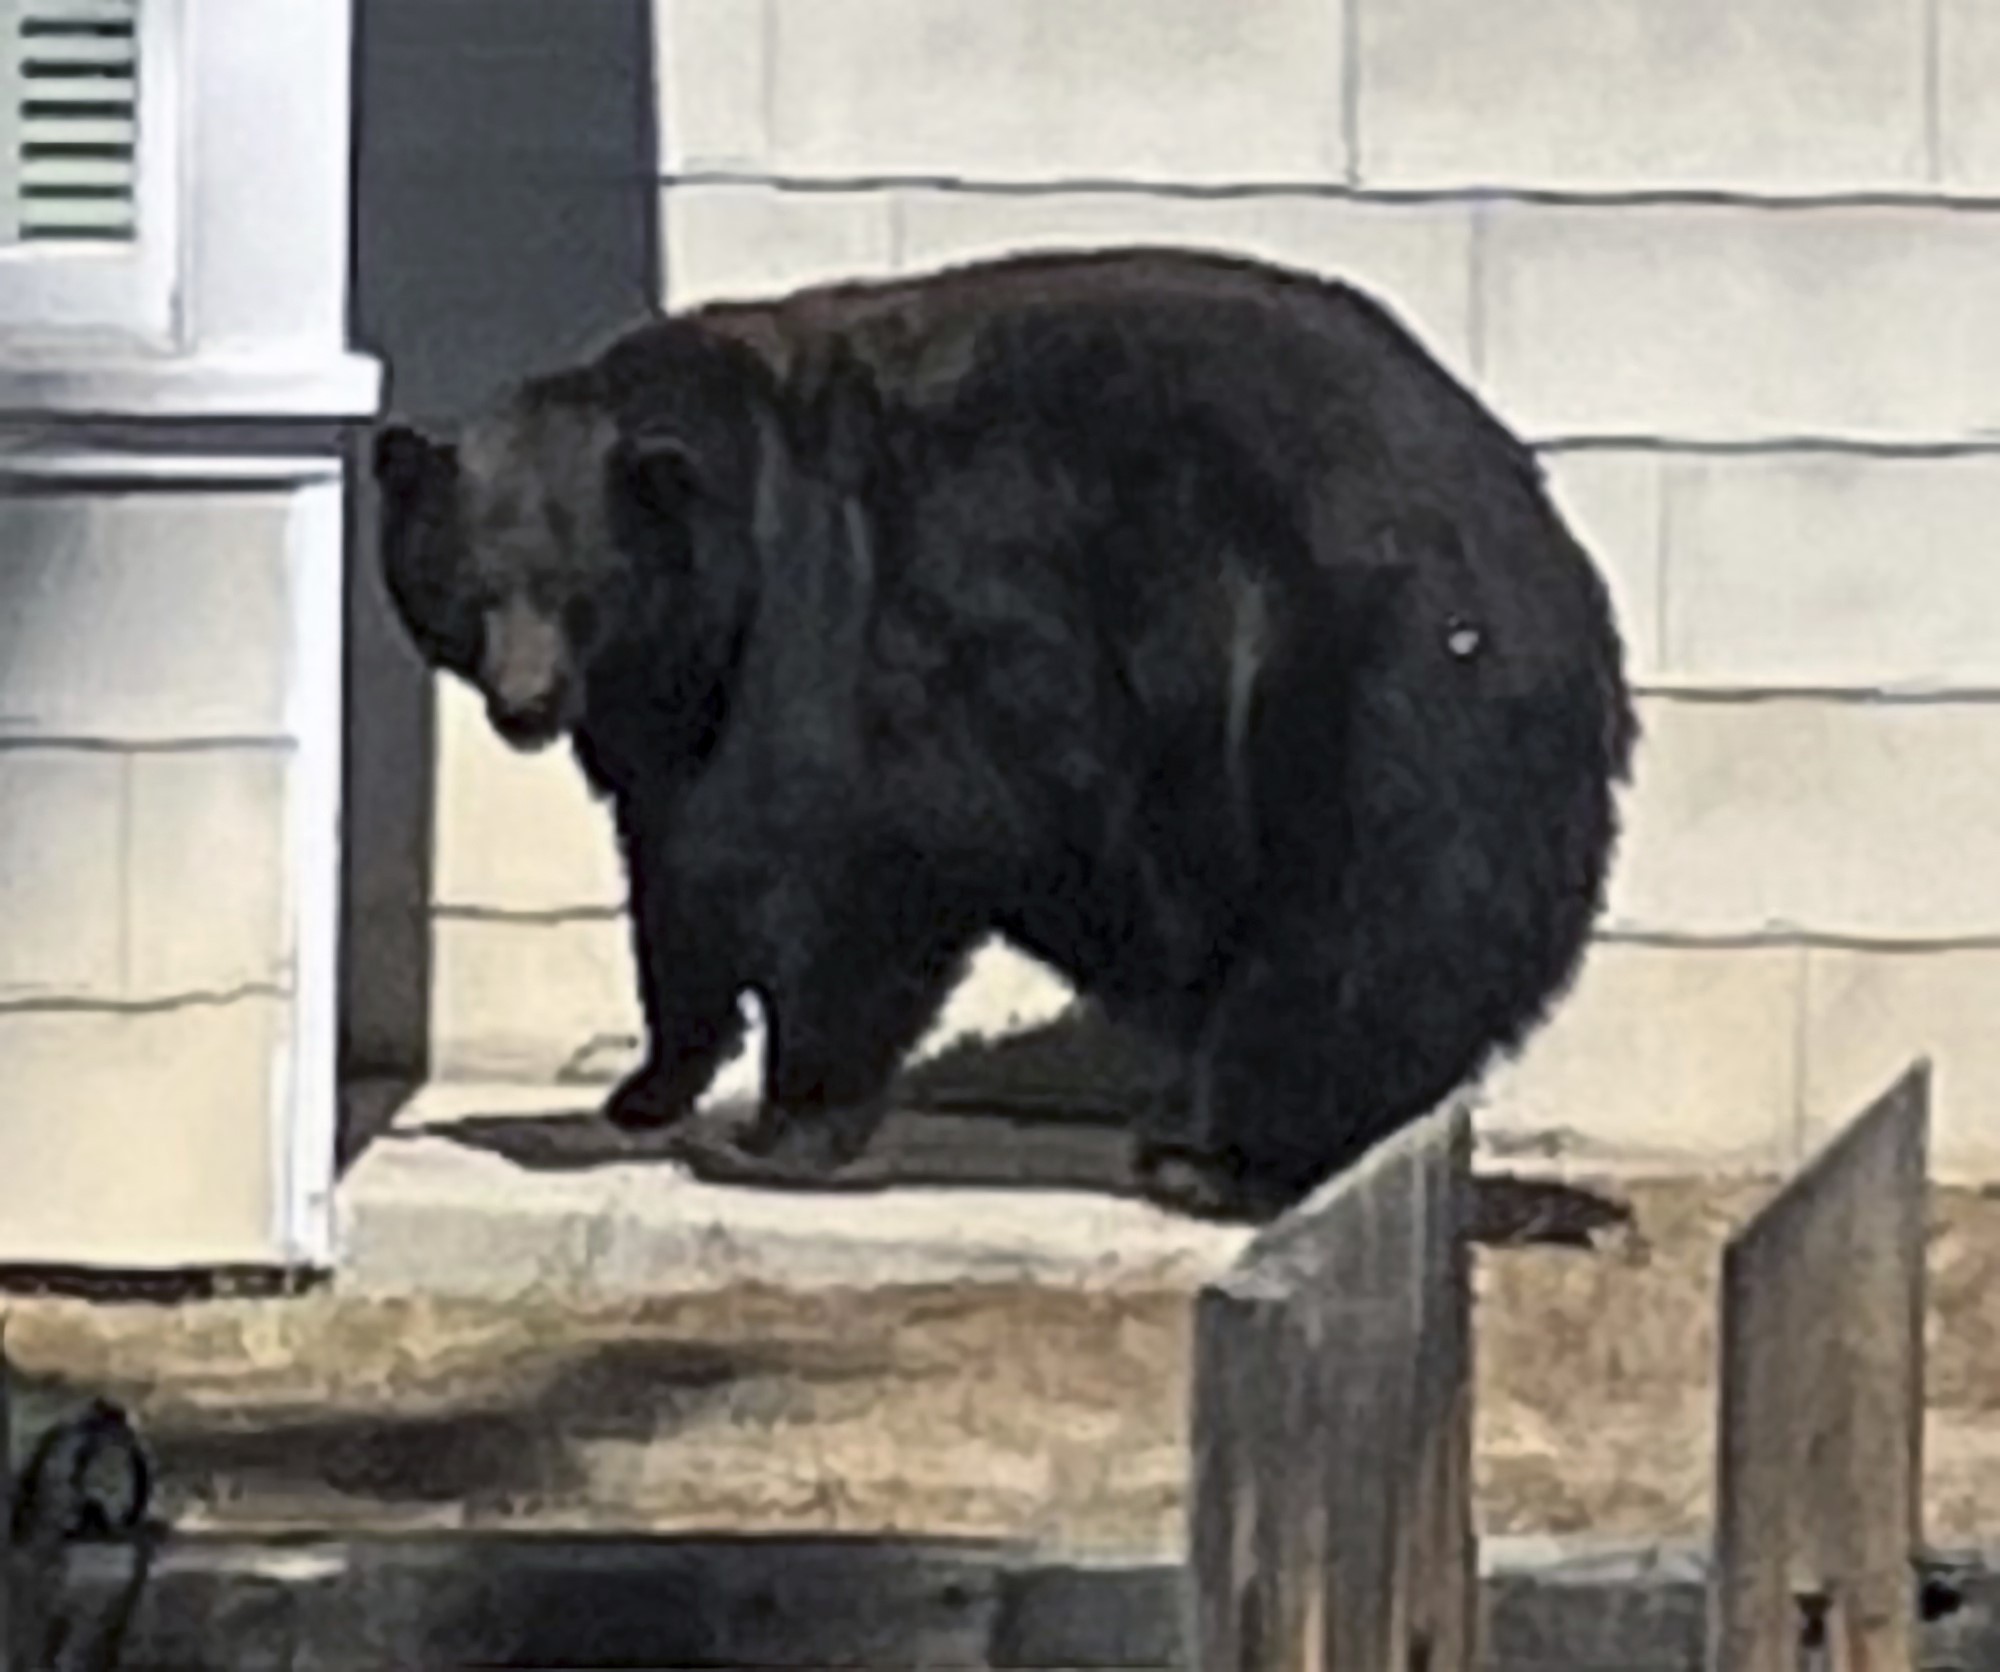 A very large female black bear on the front step of a house